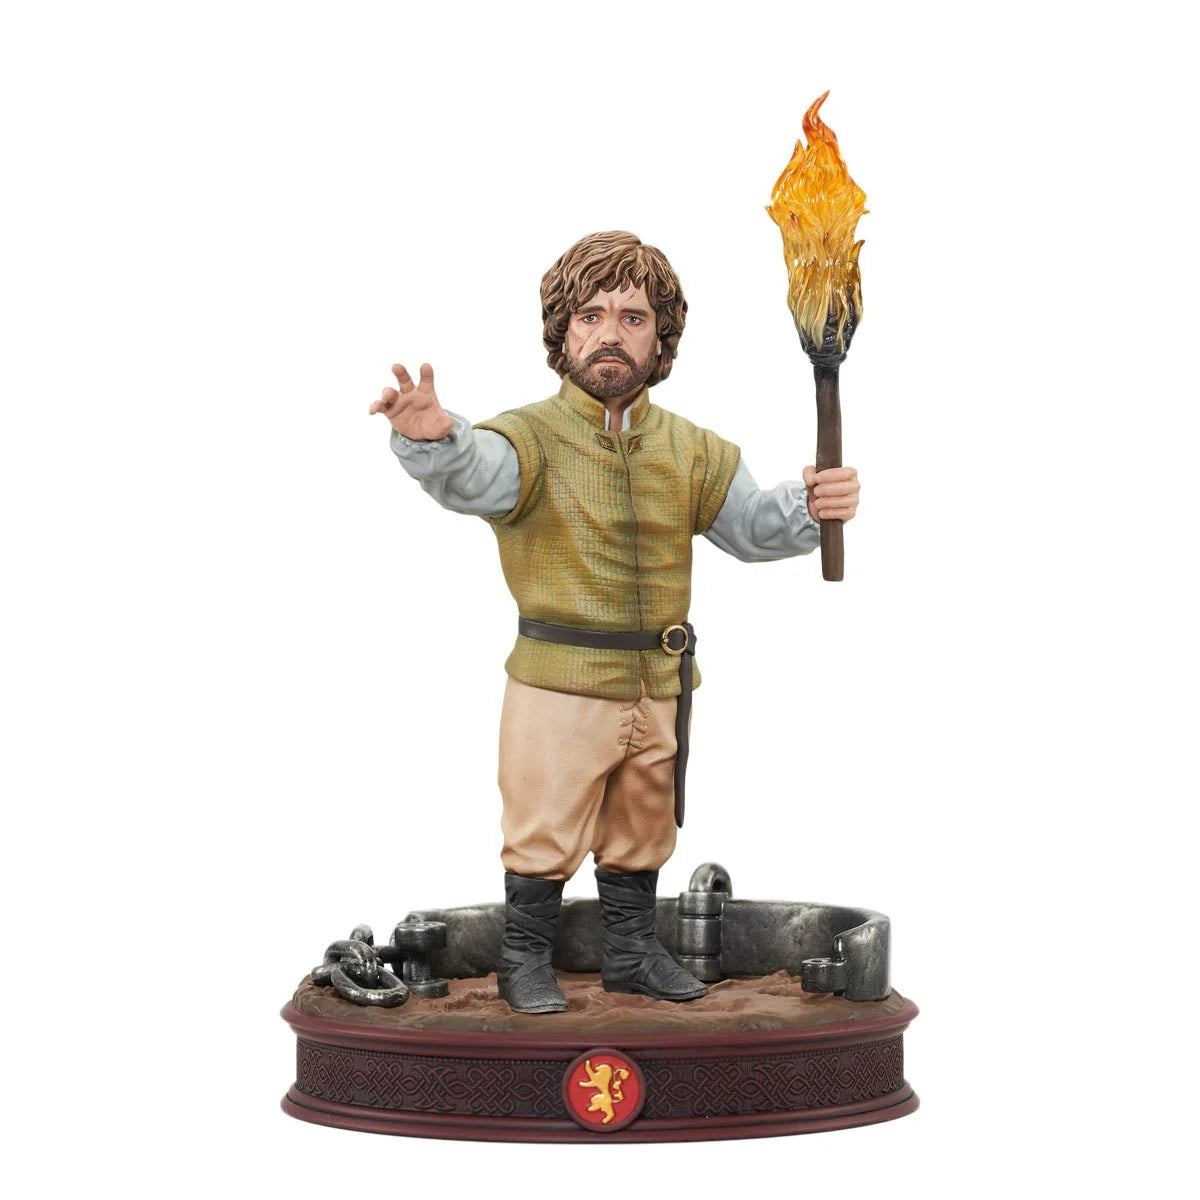 House of the Dragon Wave 1 Caraxes Statue